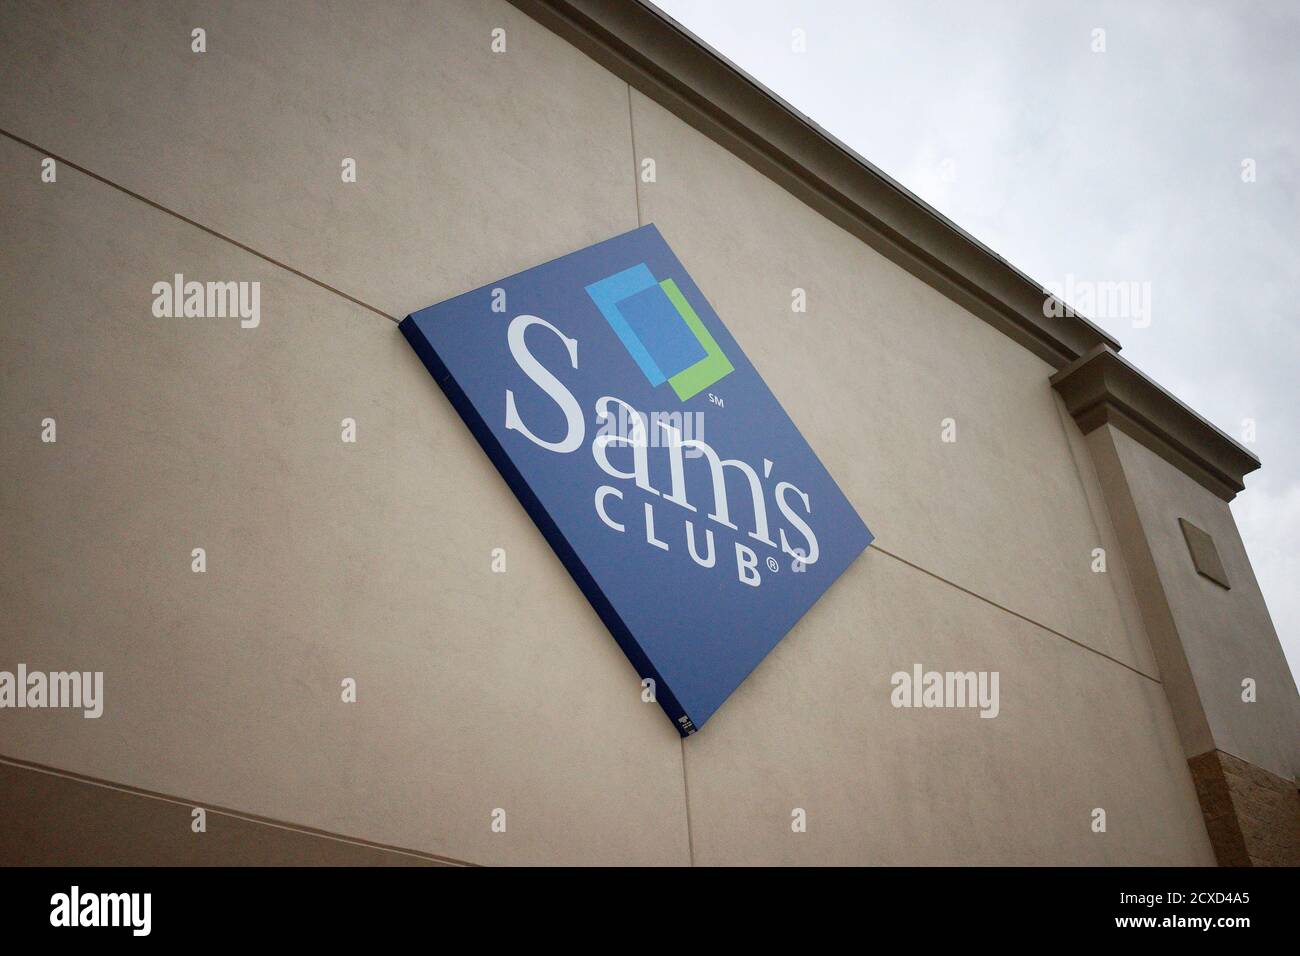 Sams club walmart hires stock photography and images Alamy